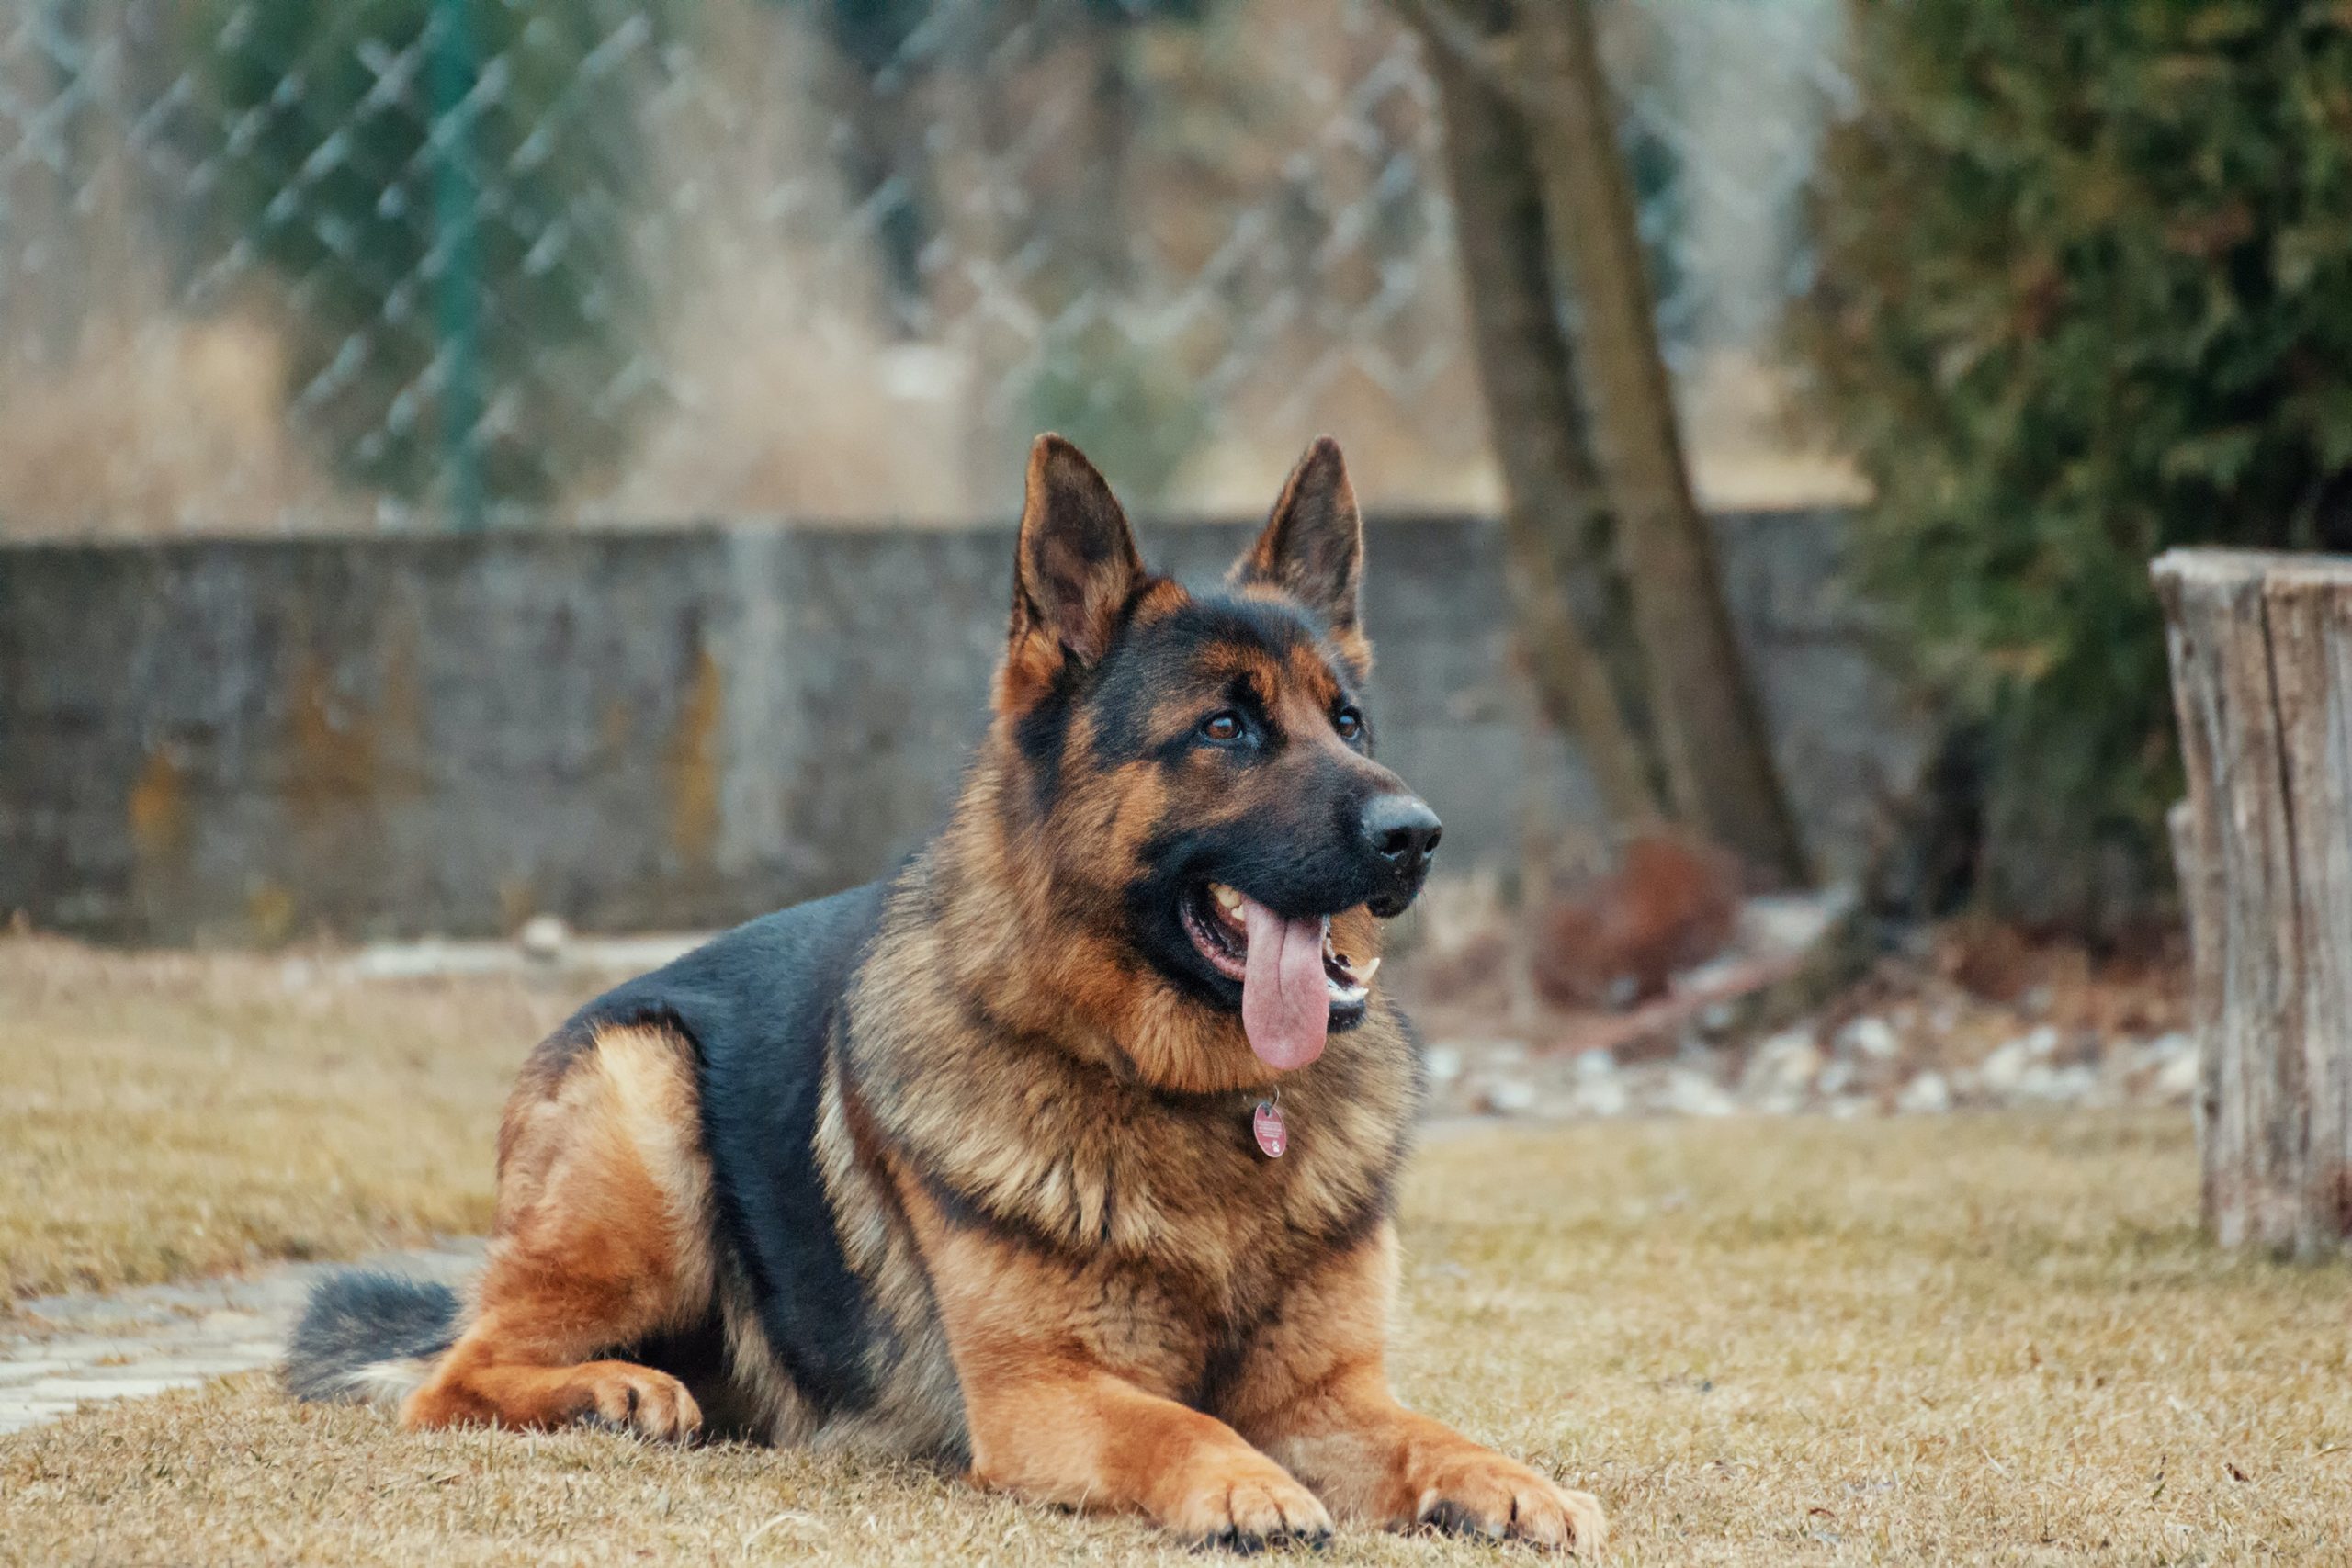 How Much Does a Purebred German Shepherd Dog Cost?